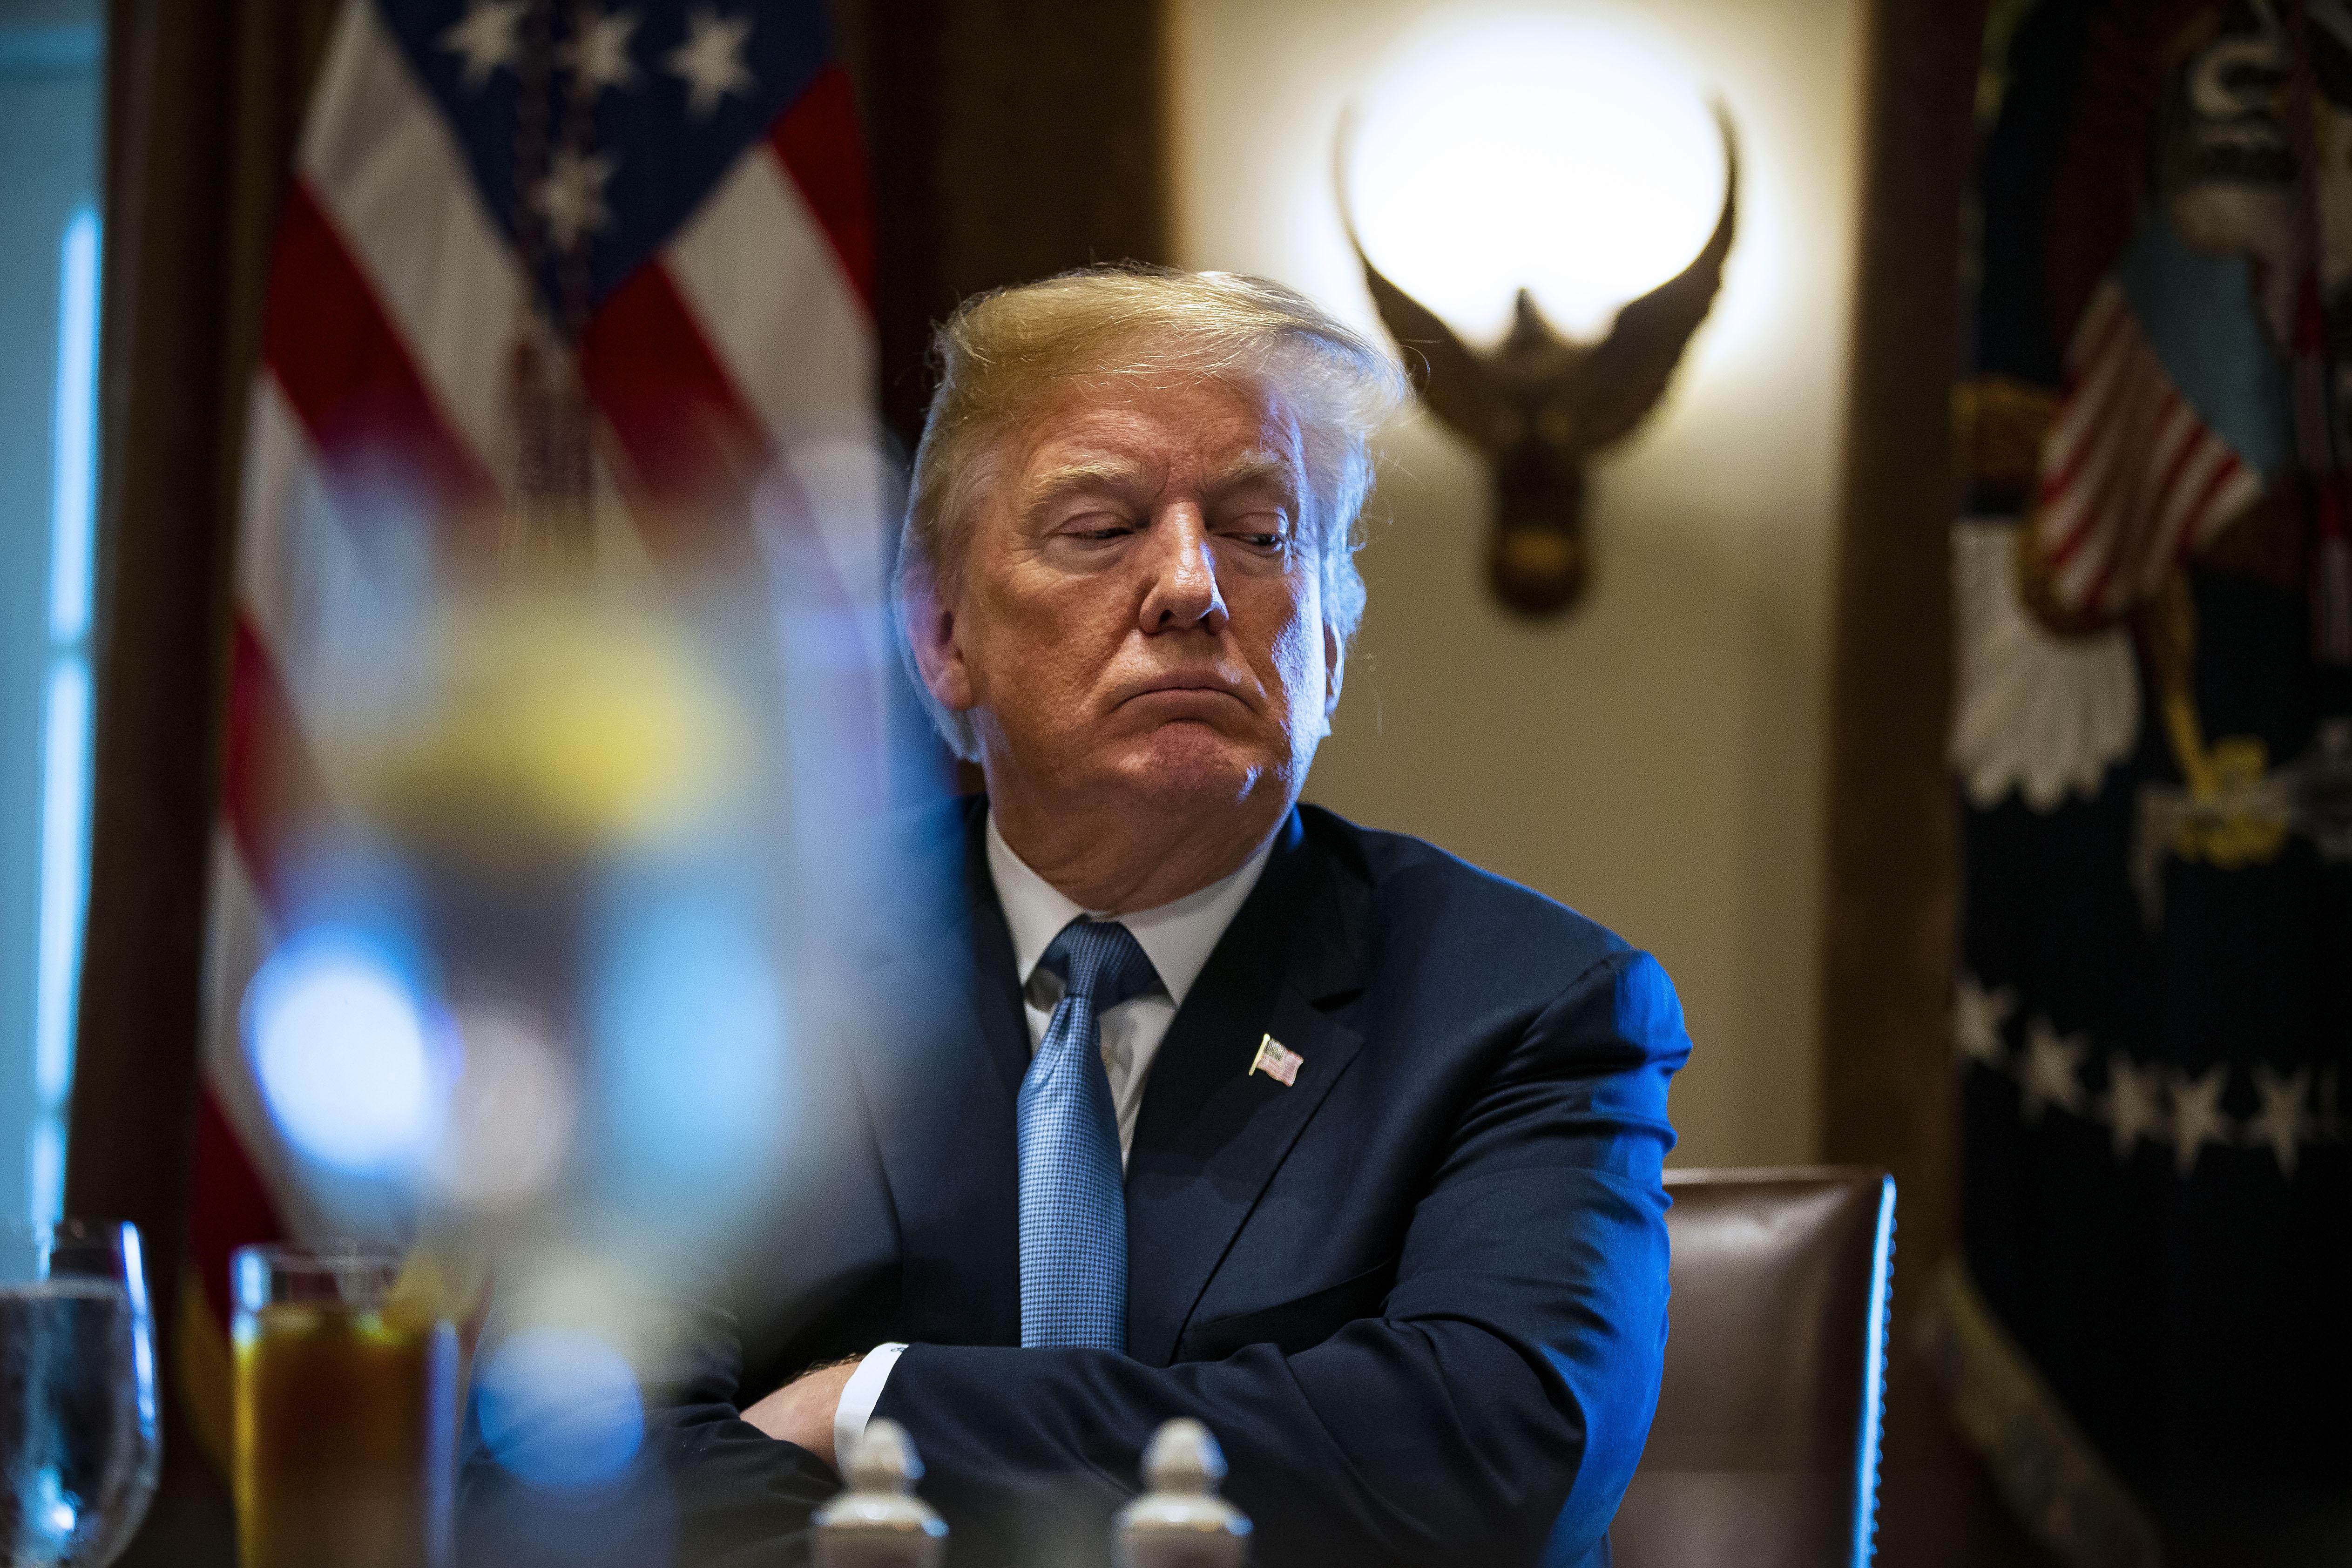 President Trump, seated at a table, crosses his arms and looks downward.